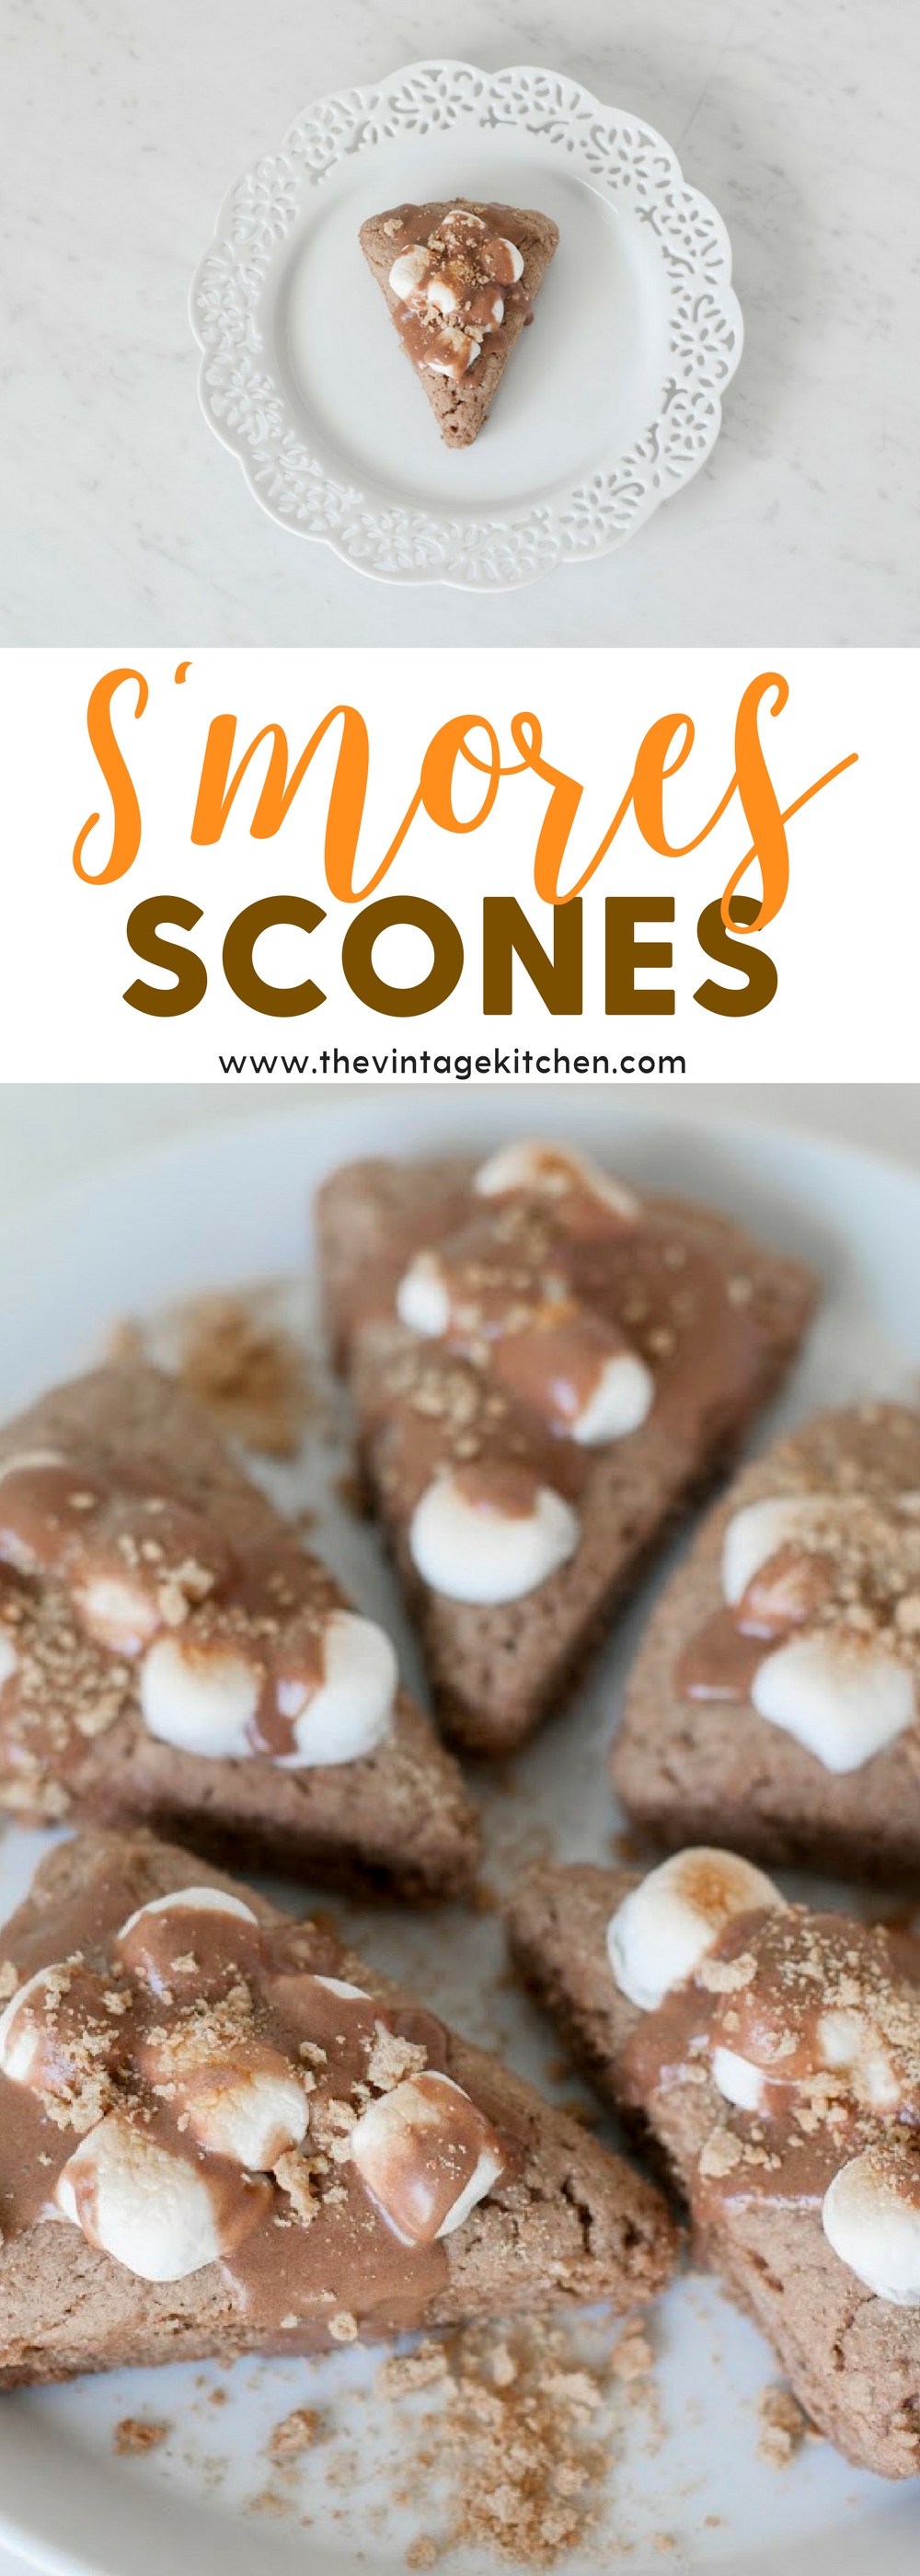 These are to die for and incredibly delicious with the yummy flavors of s'mores baked into light, fluffy scones! One just may not be enough!